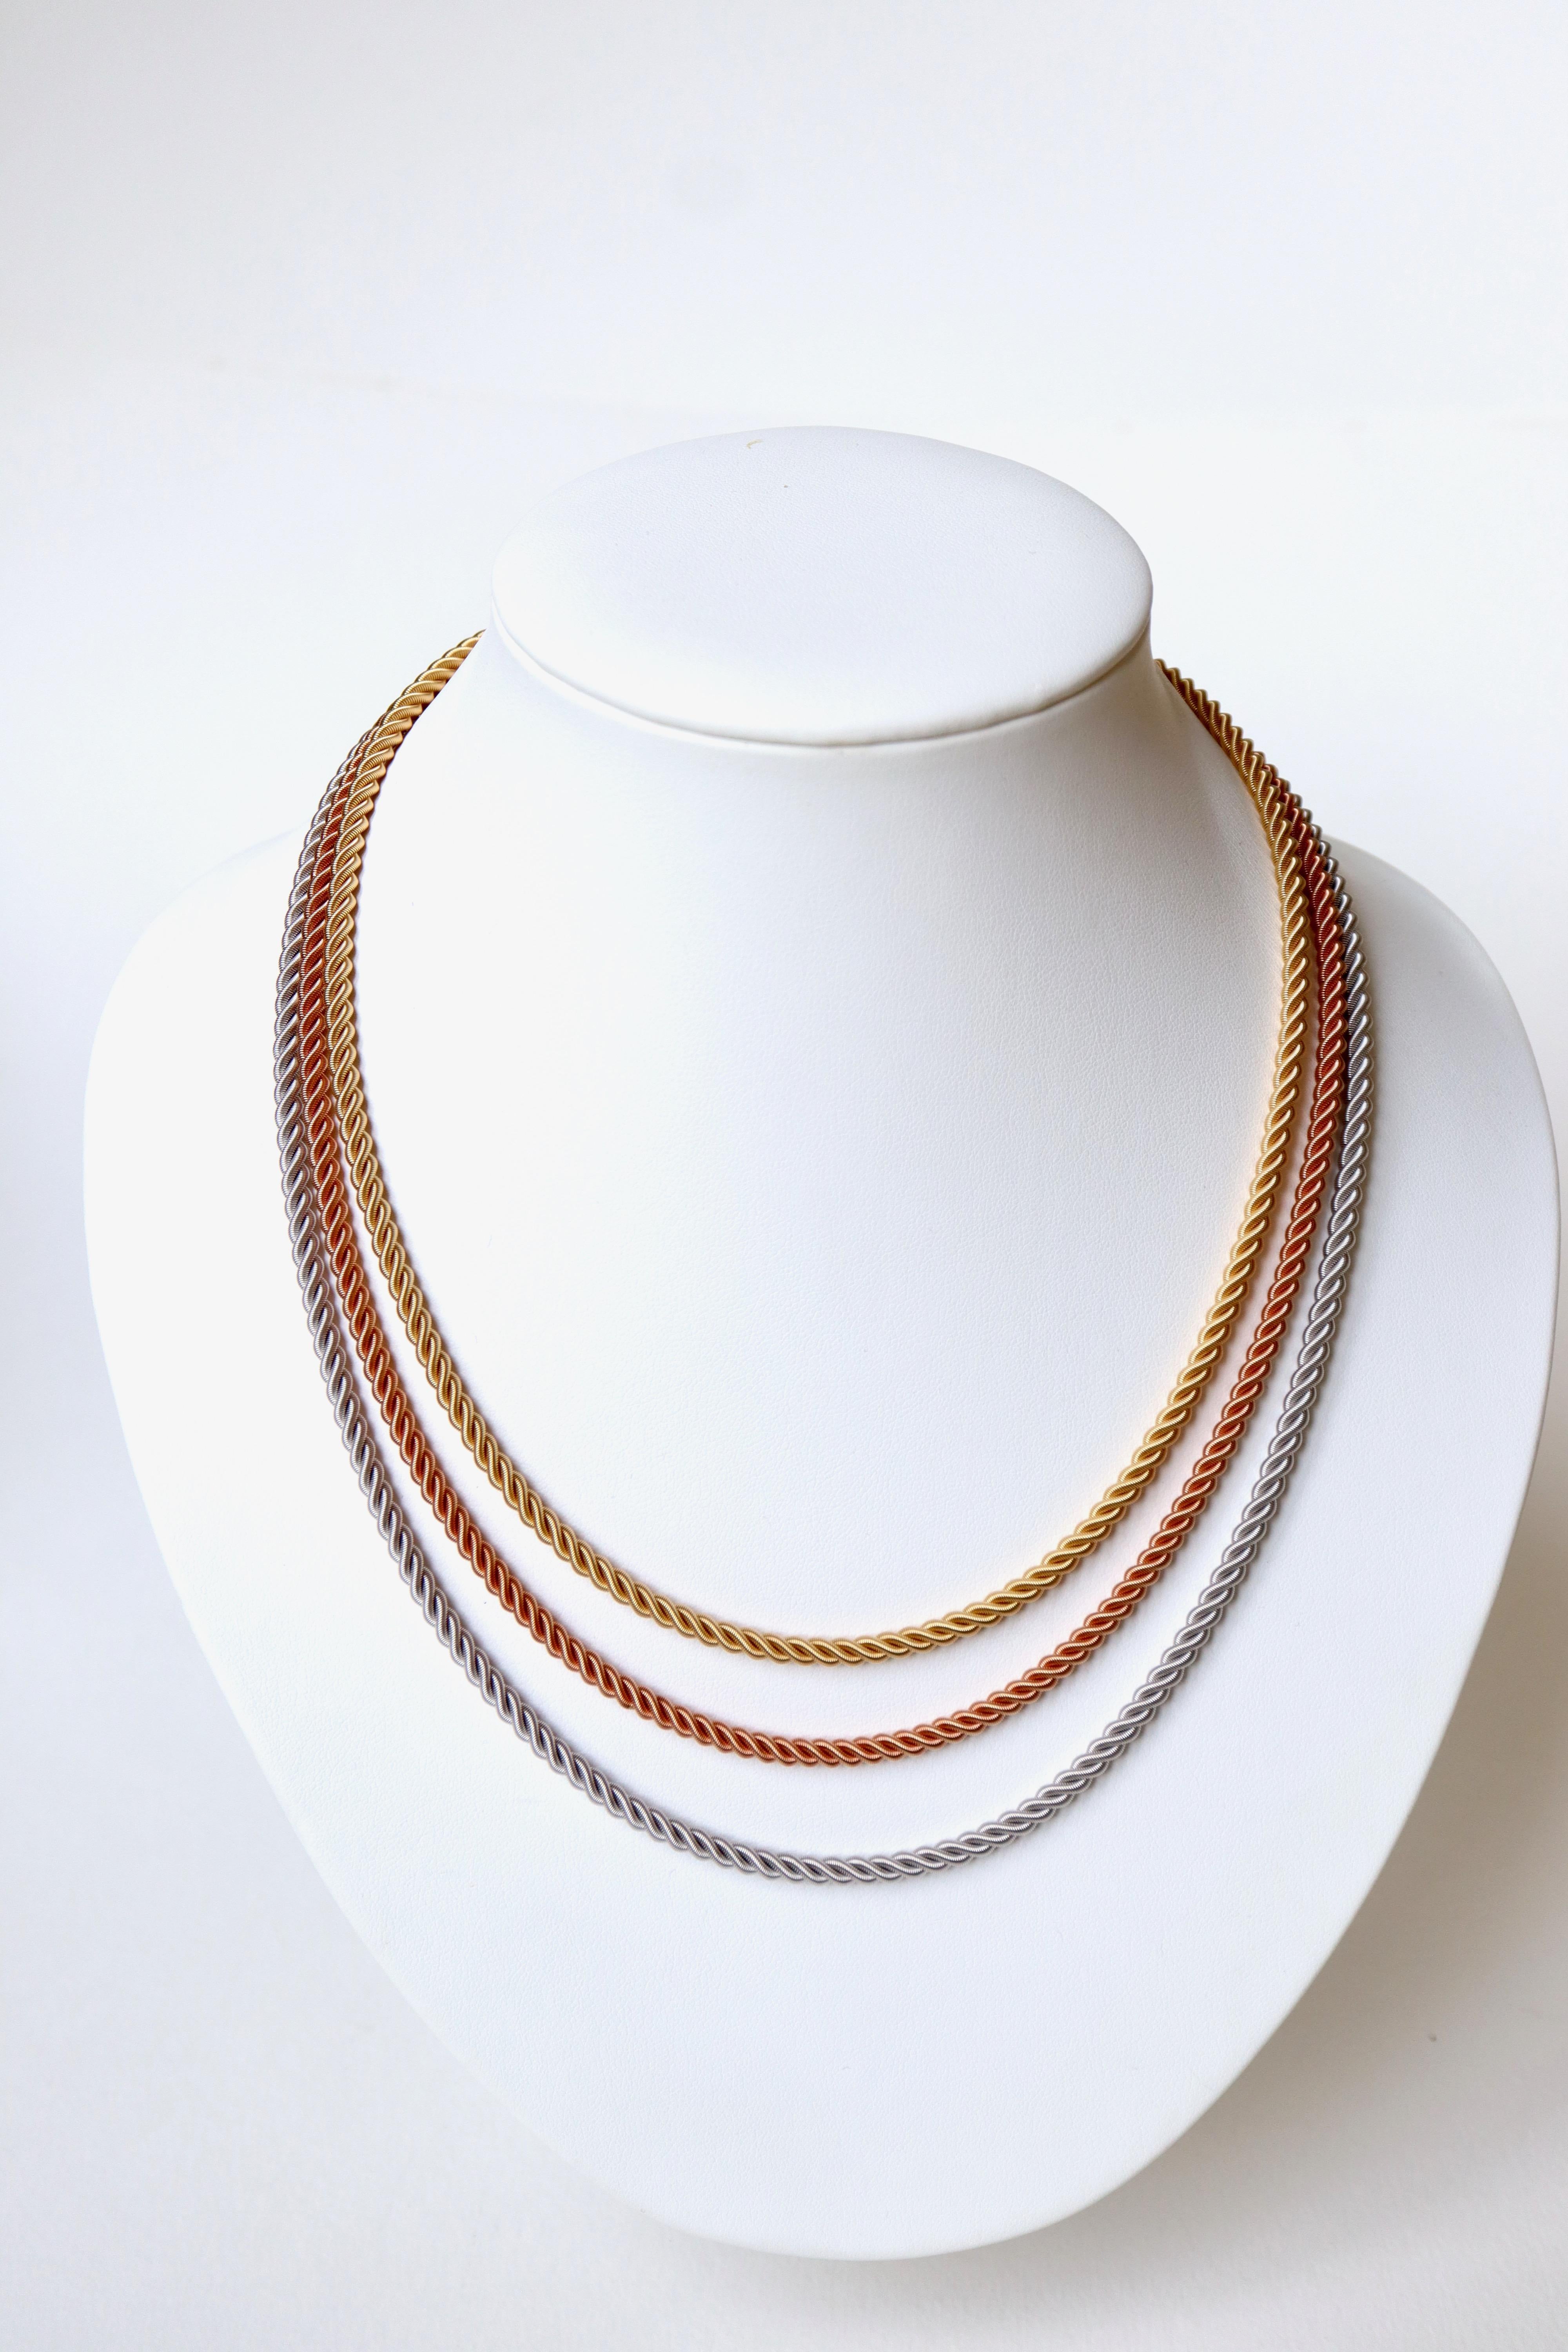 Necklace three Gold 18 kt composed of three Rows in fall of three Twists. One cable in yellow gold, one cable in pink gold, one cable in white gold. Each twist is made up of three coiled and twisted threads.
Length: 46 to 53 cm 
Width of each cable: